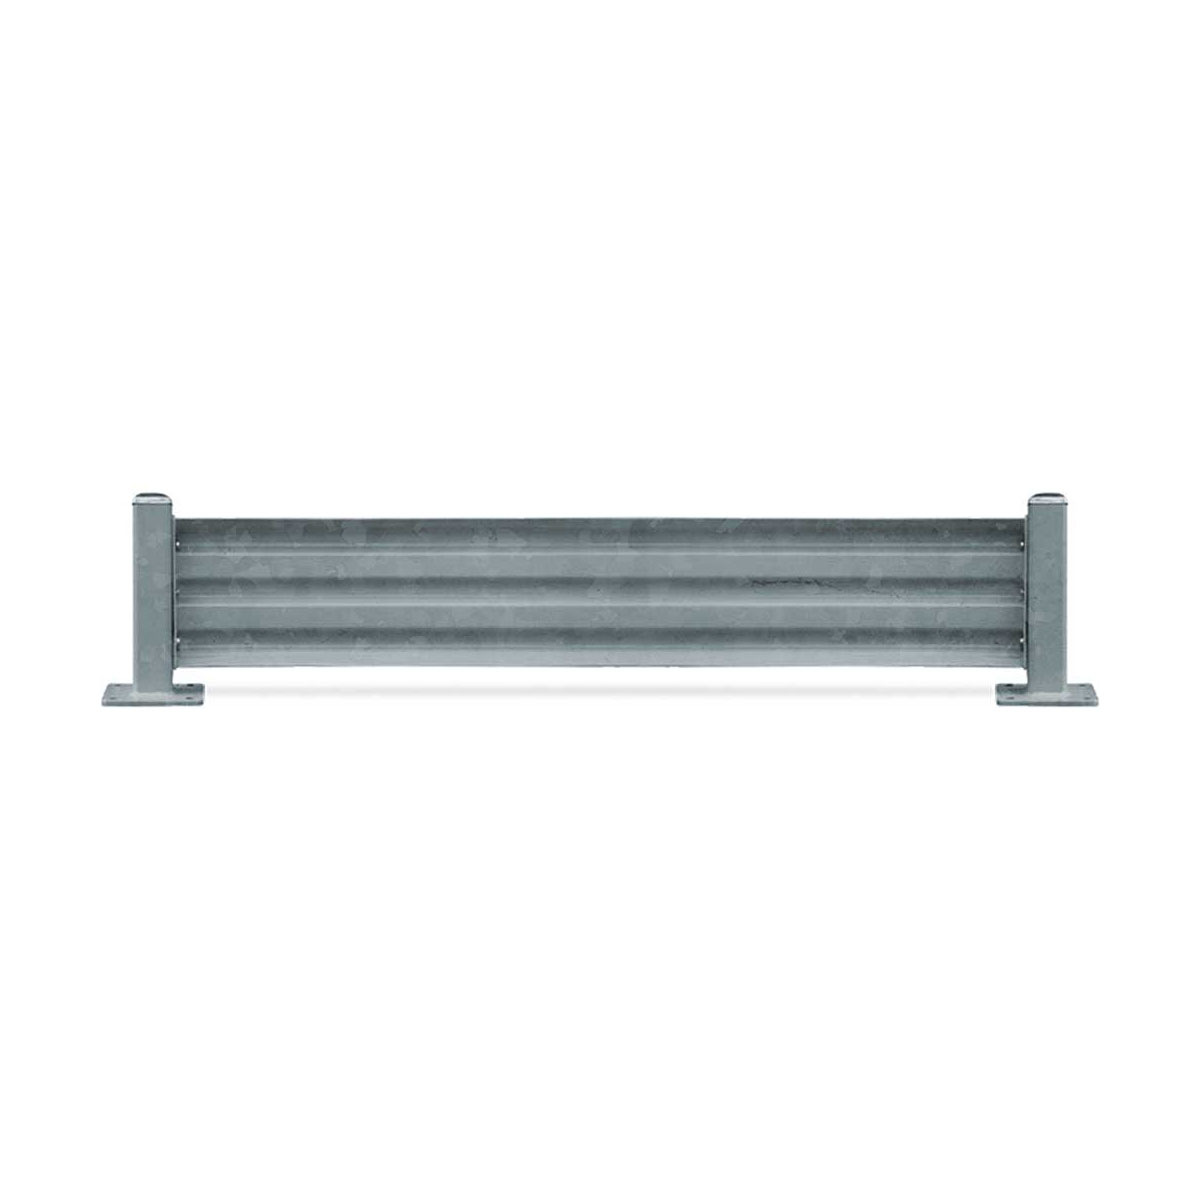 Buy Traffic Barrier - GuardX (Galvanised) available at Astrolift NZ